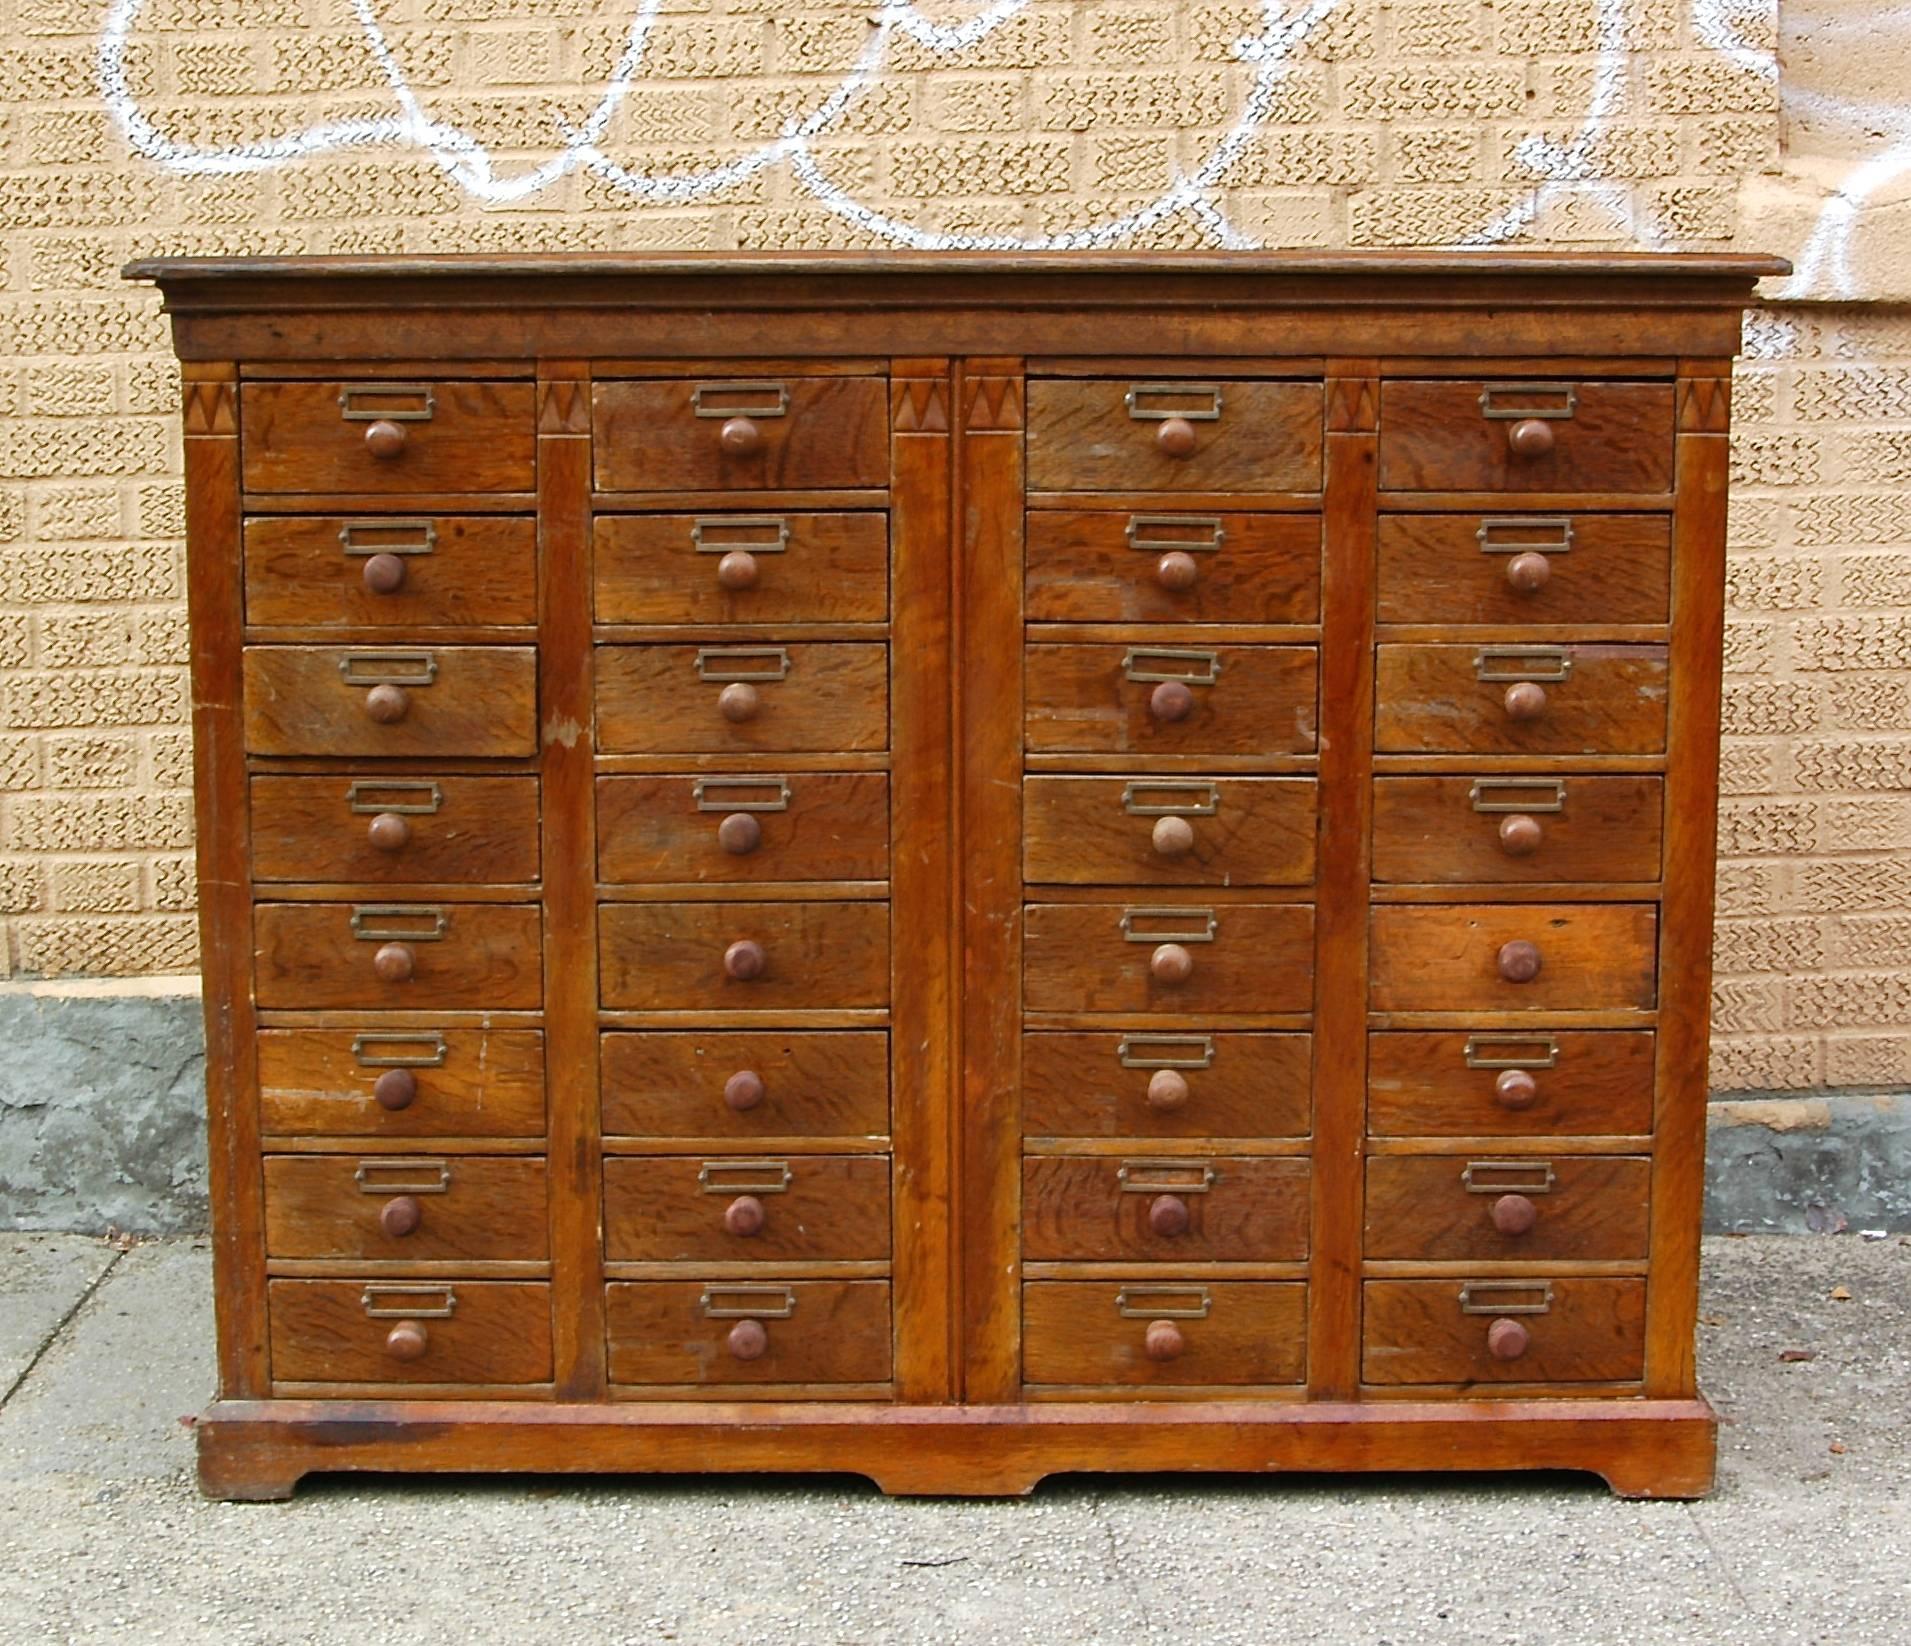 Nicely detailed, antique, oak, apothecary medicine cabinet with 32 drawers

55 inches w x 19.5 inches d x 43 inches; ht, drawers are 9 inches w x 3 inches ht x 14 inches d